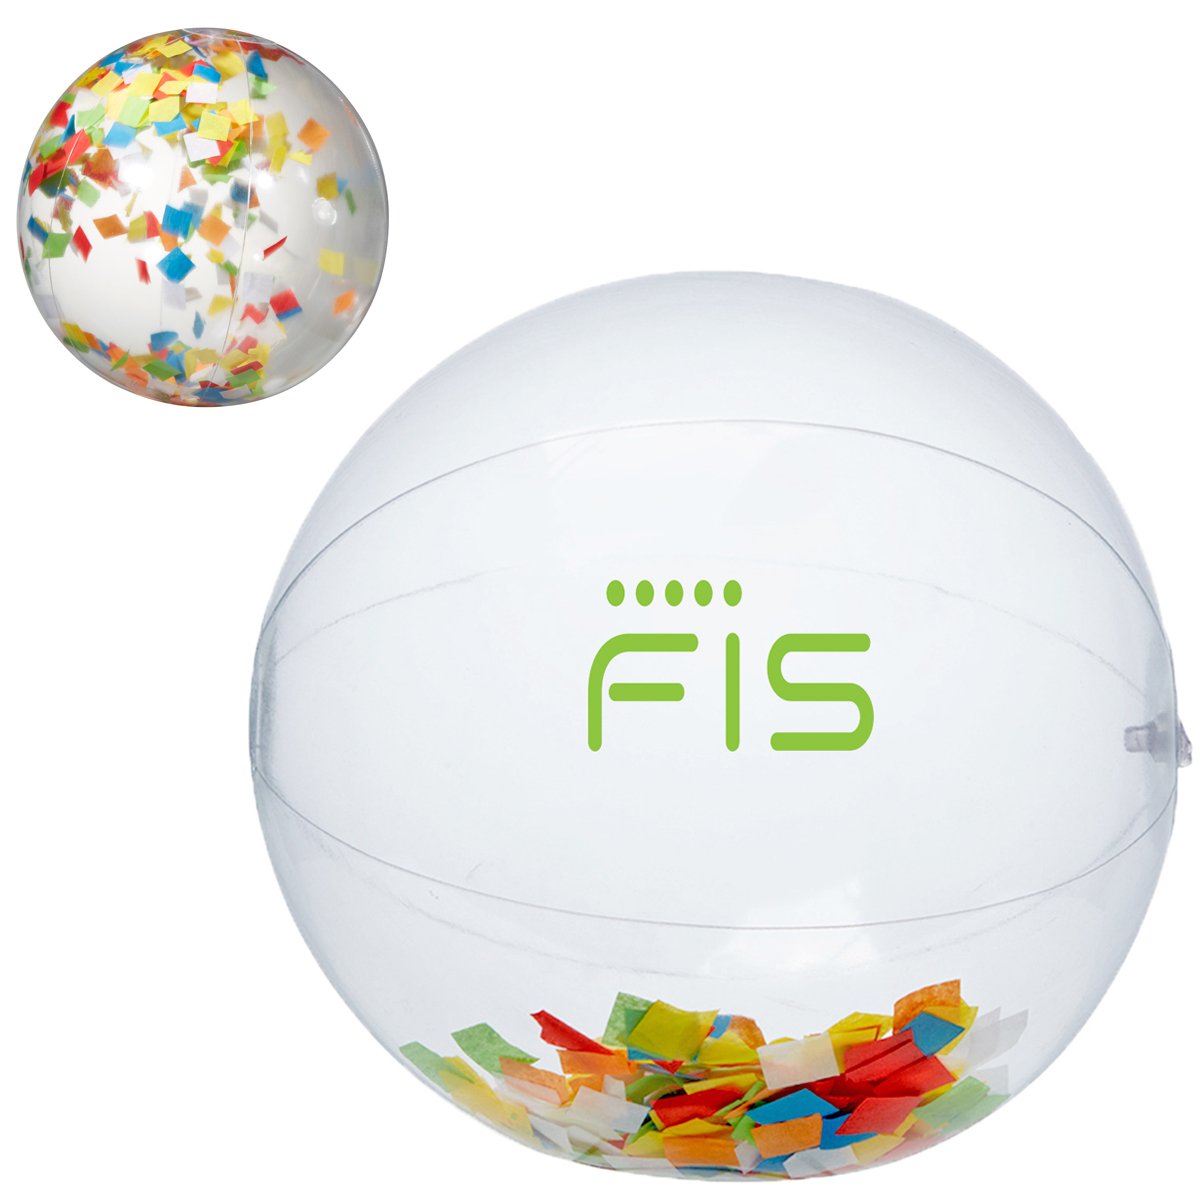 Promotional Confetti Filled Beach Ball-16